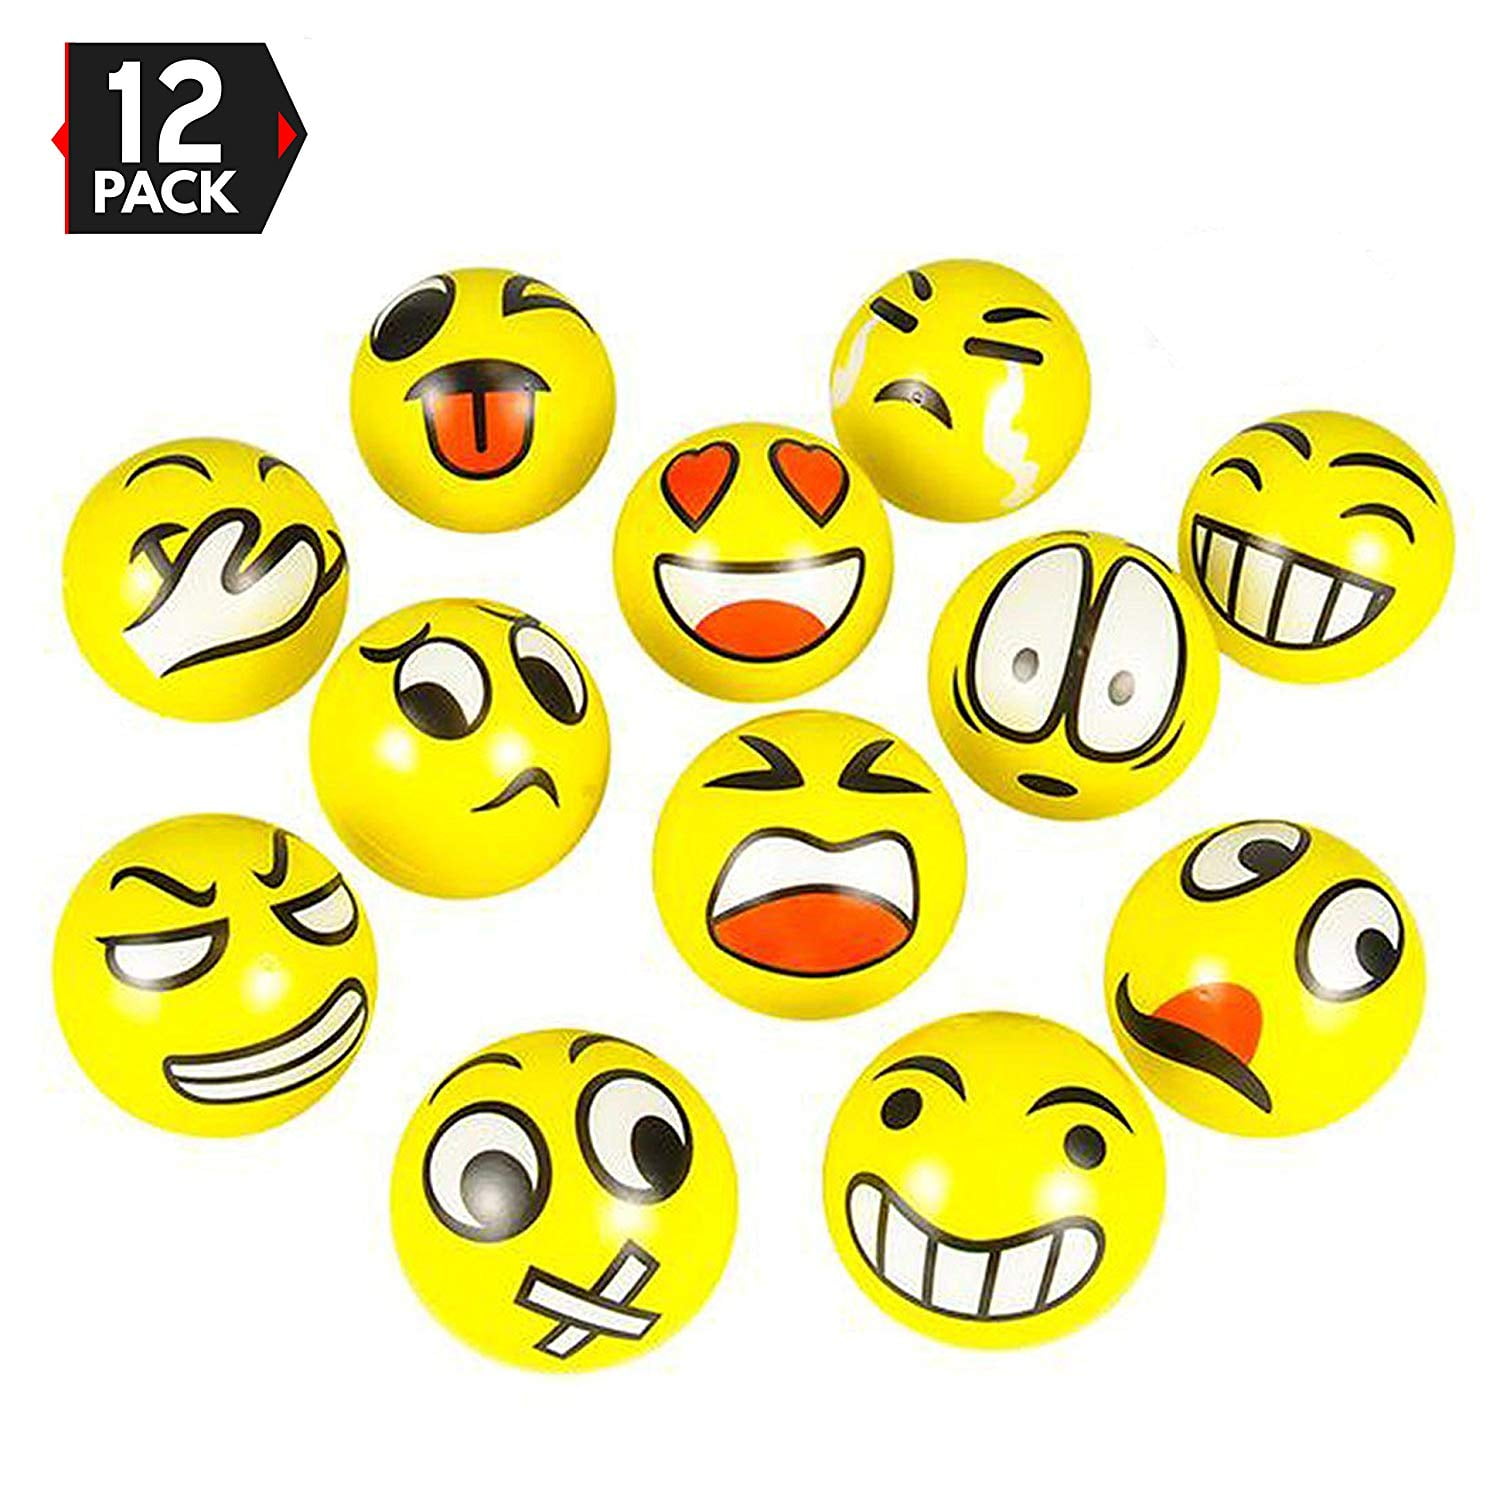 8 x STRESS COLOR BALLS Hand Relief Squeeze Toy Relieve Anti-stress Soft Smiley A 